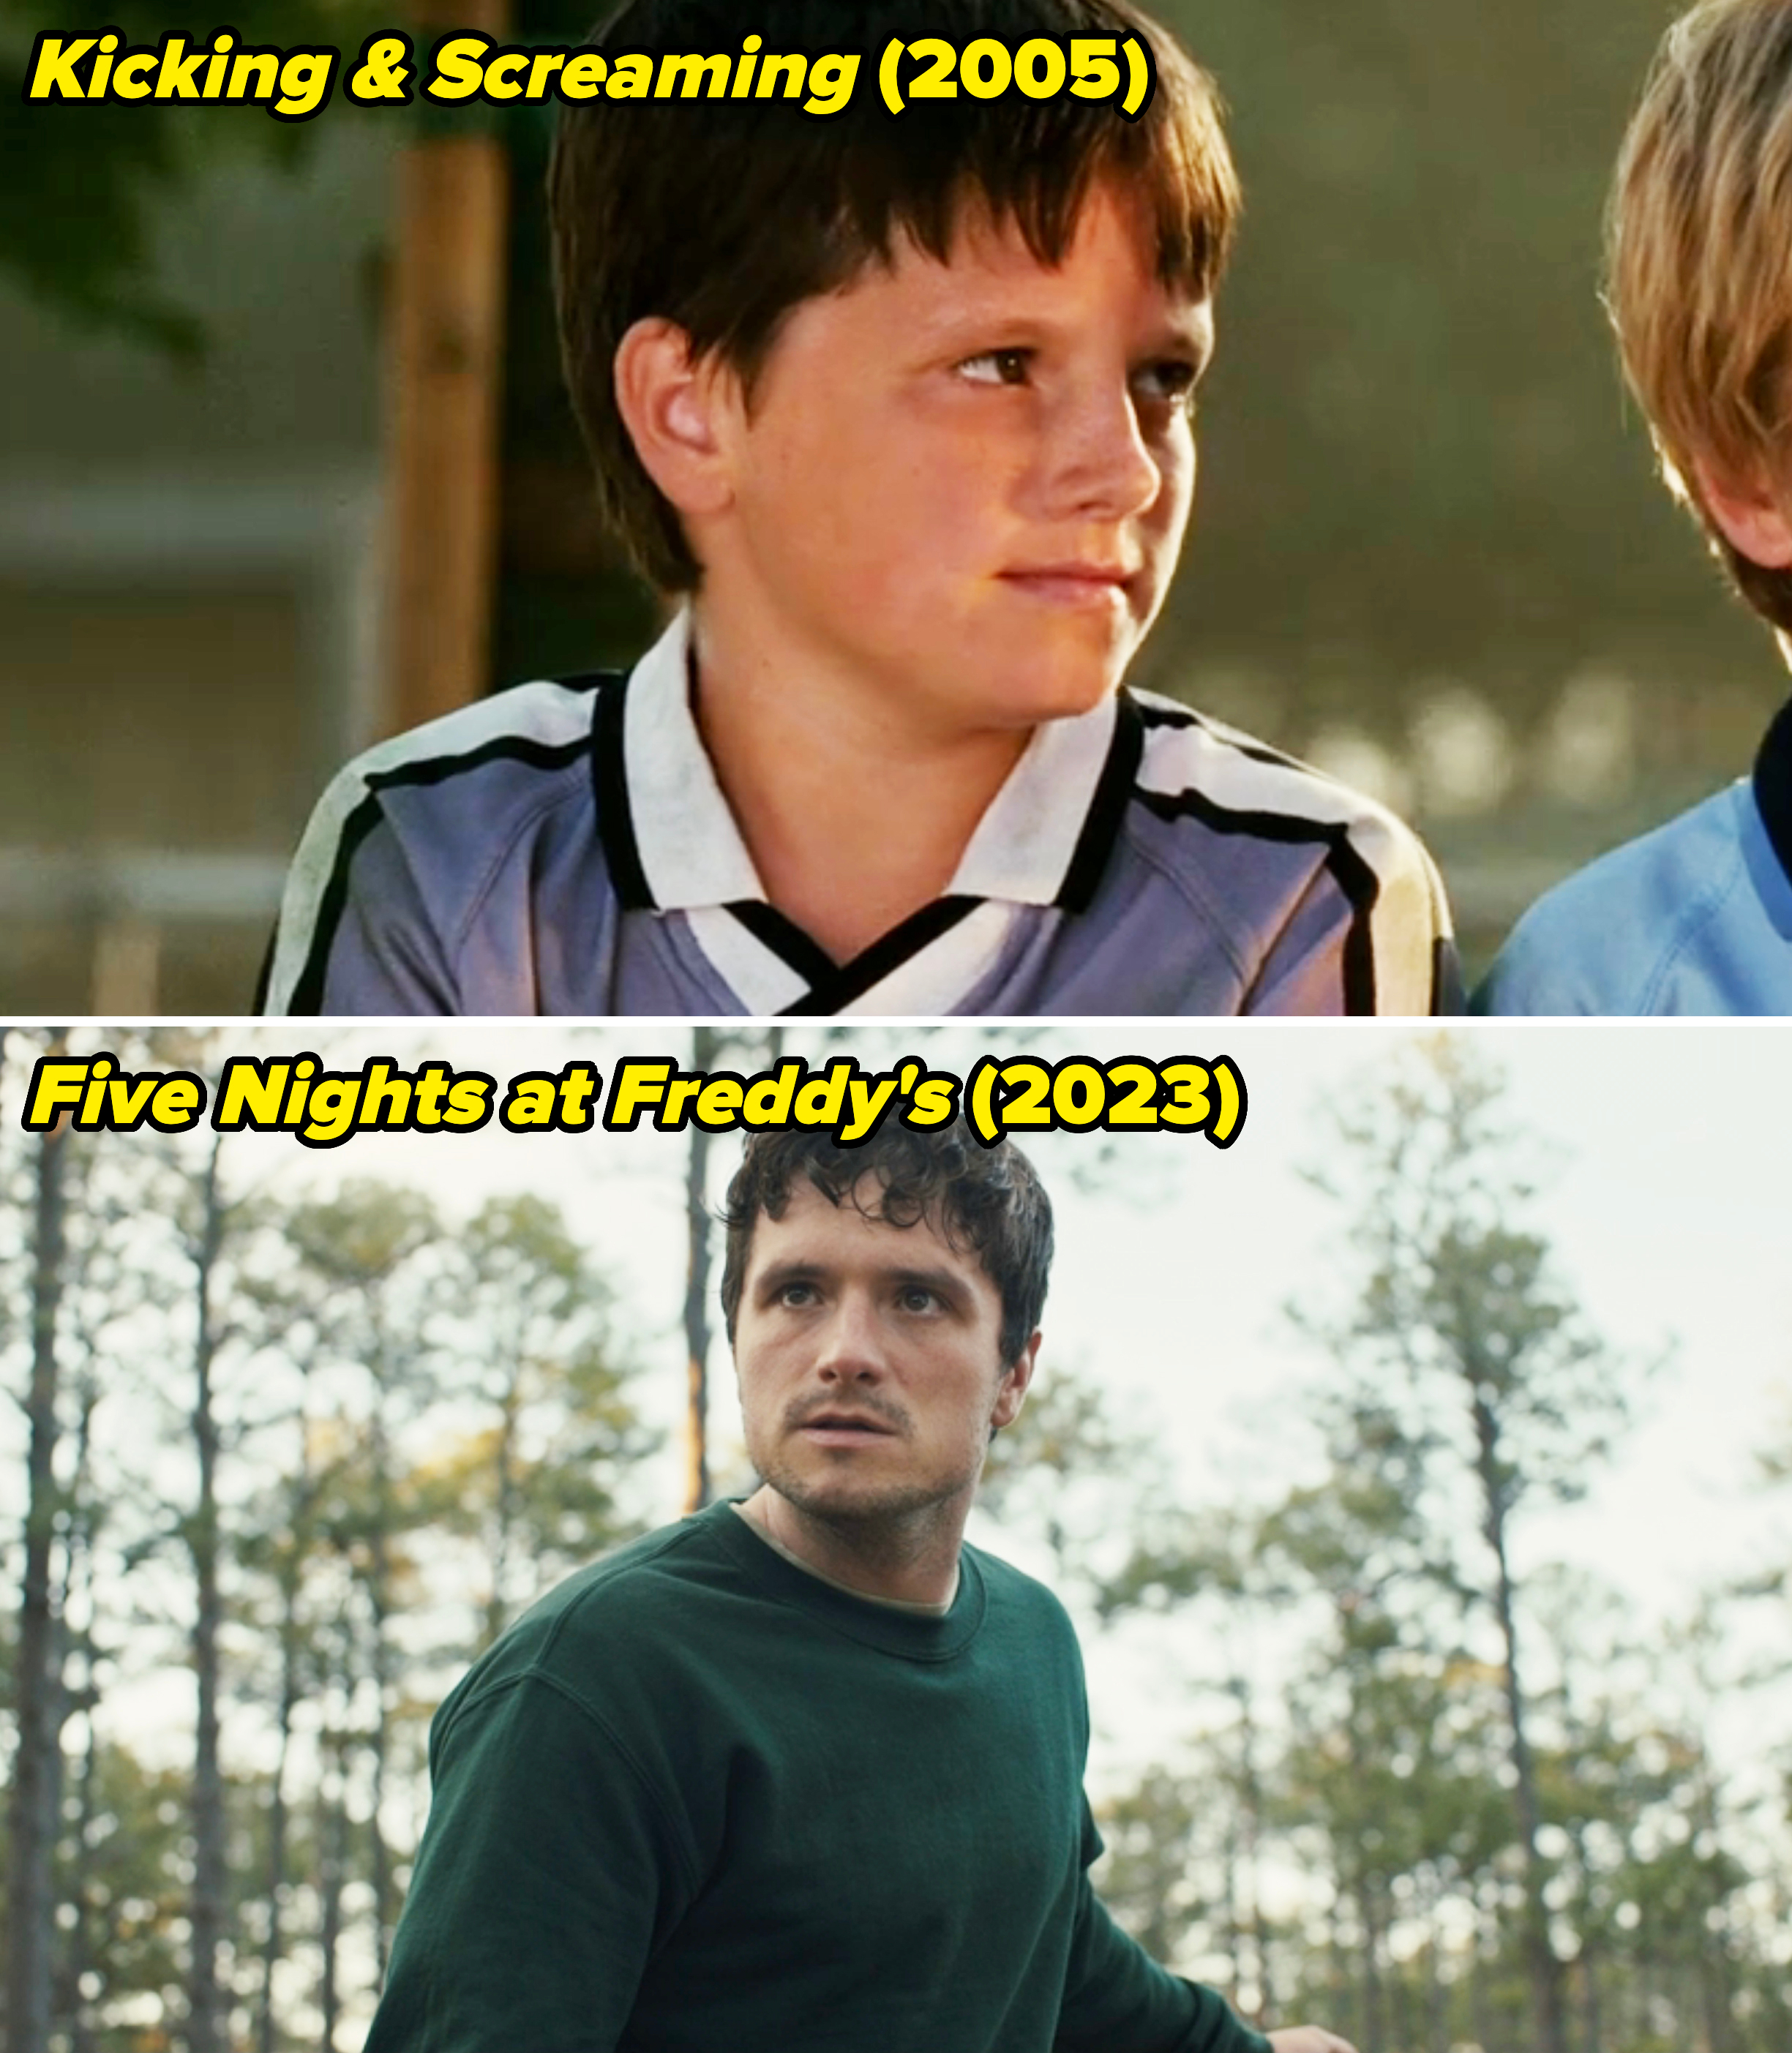 him in 2005 and then acting in a movie in 2023